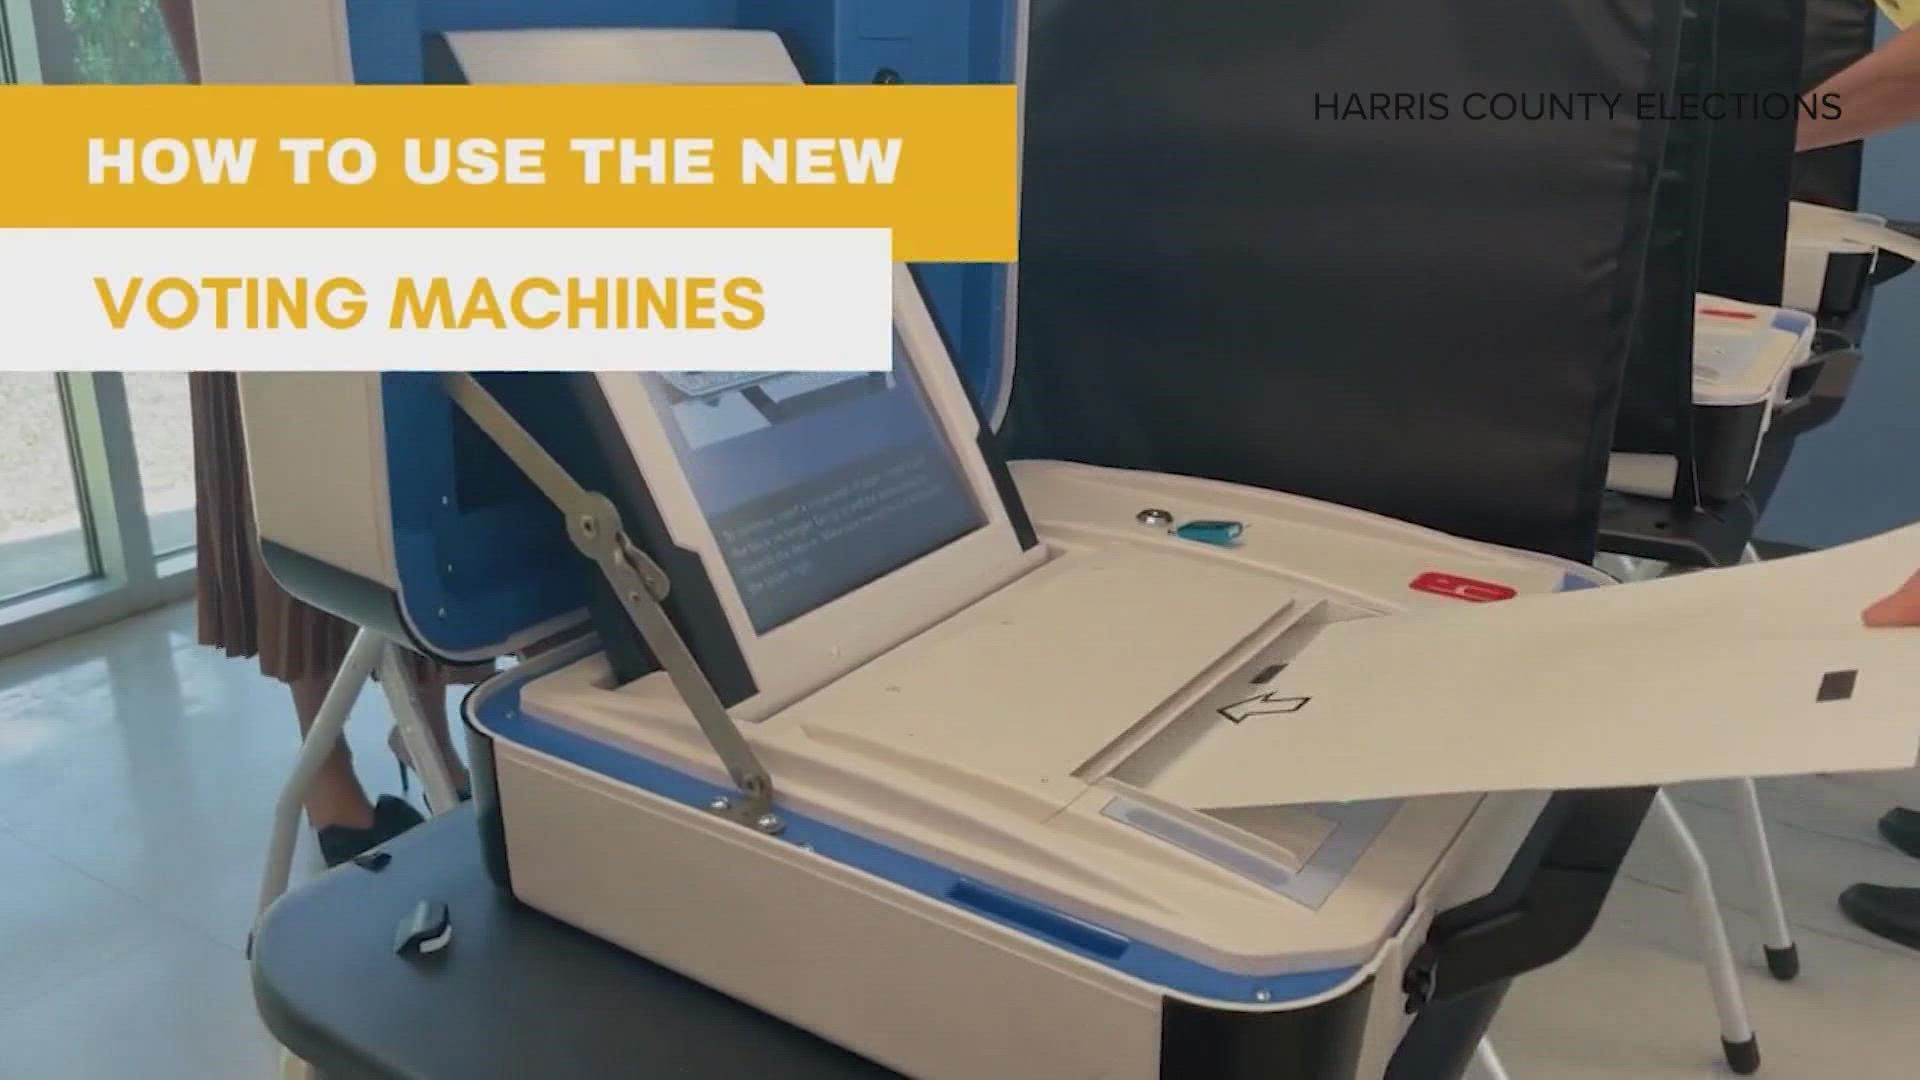 Here's what to expect with the new voting machines in Harris County.